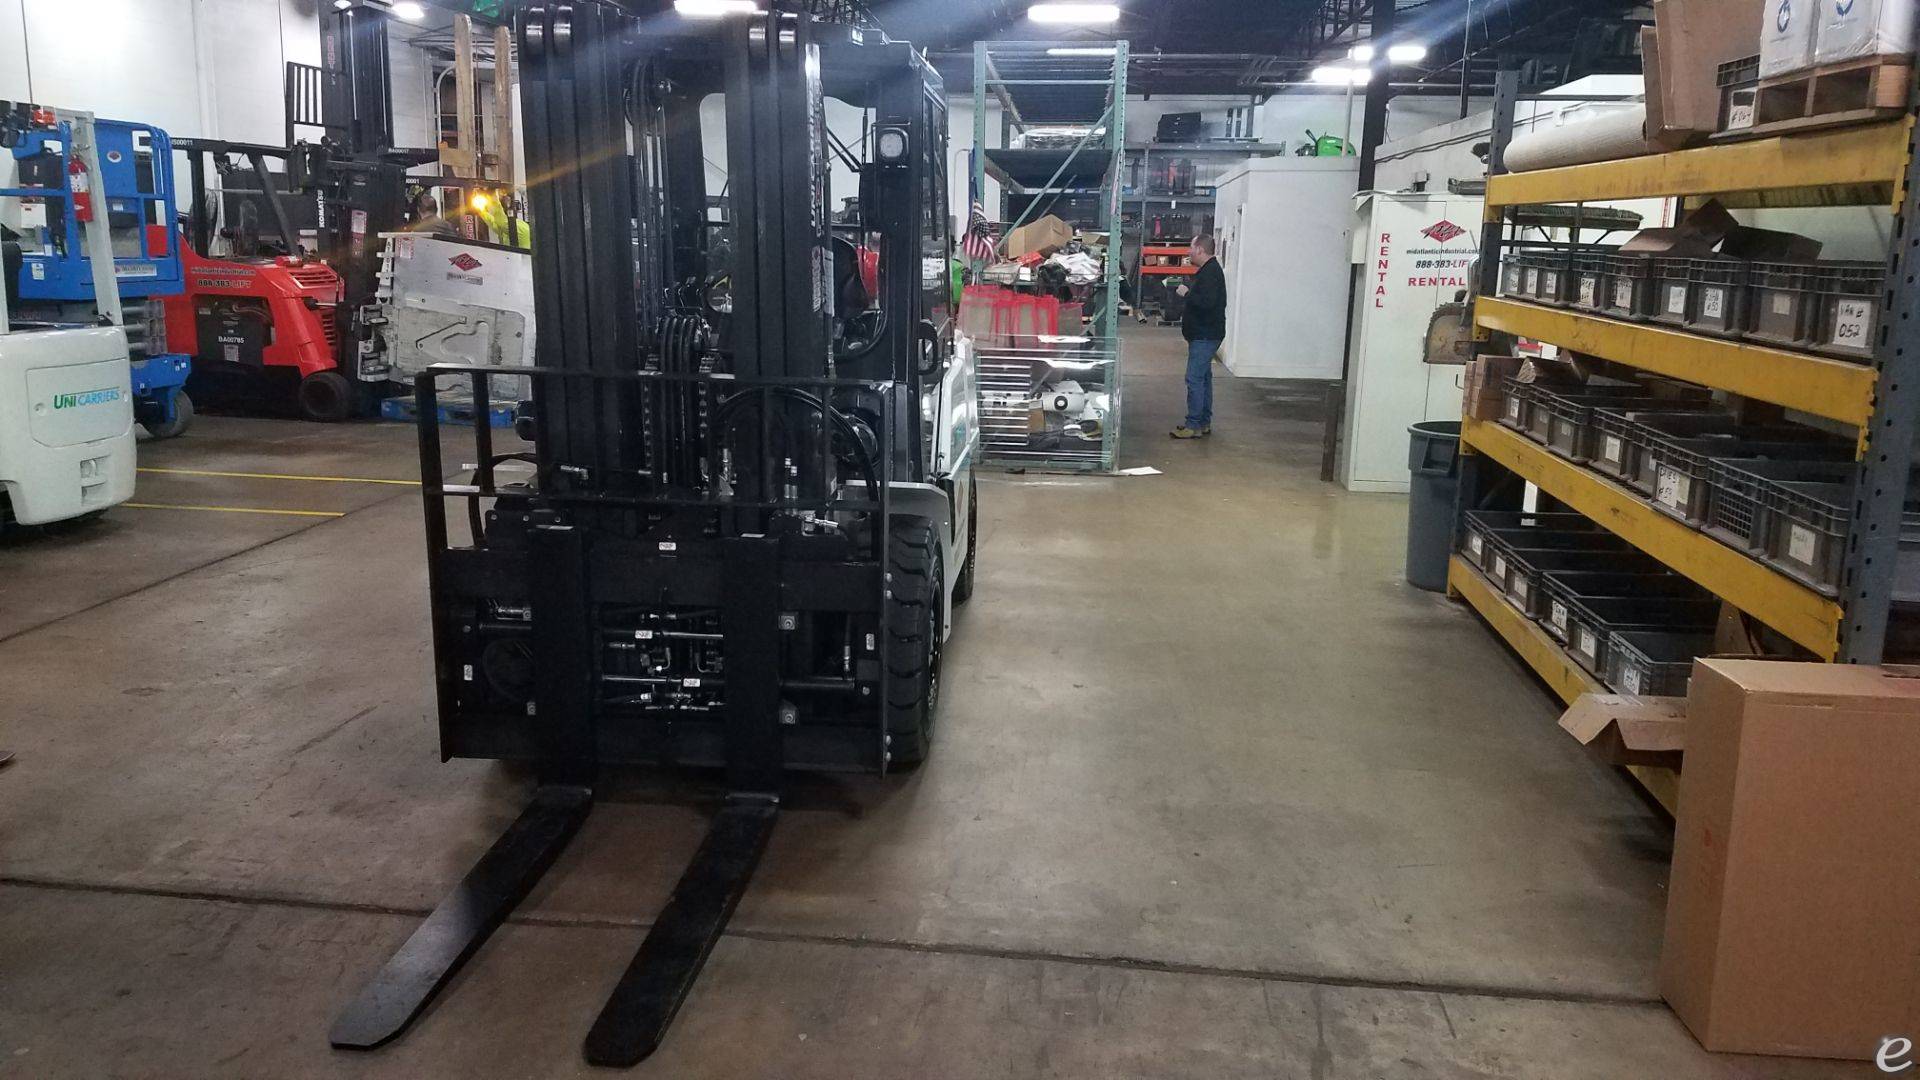 2018 Unicarriers PF110YLP Pneumatic Tire Forklift - 123Forklift